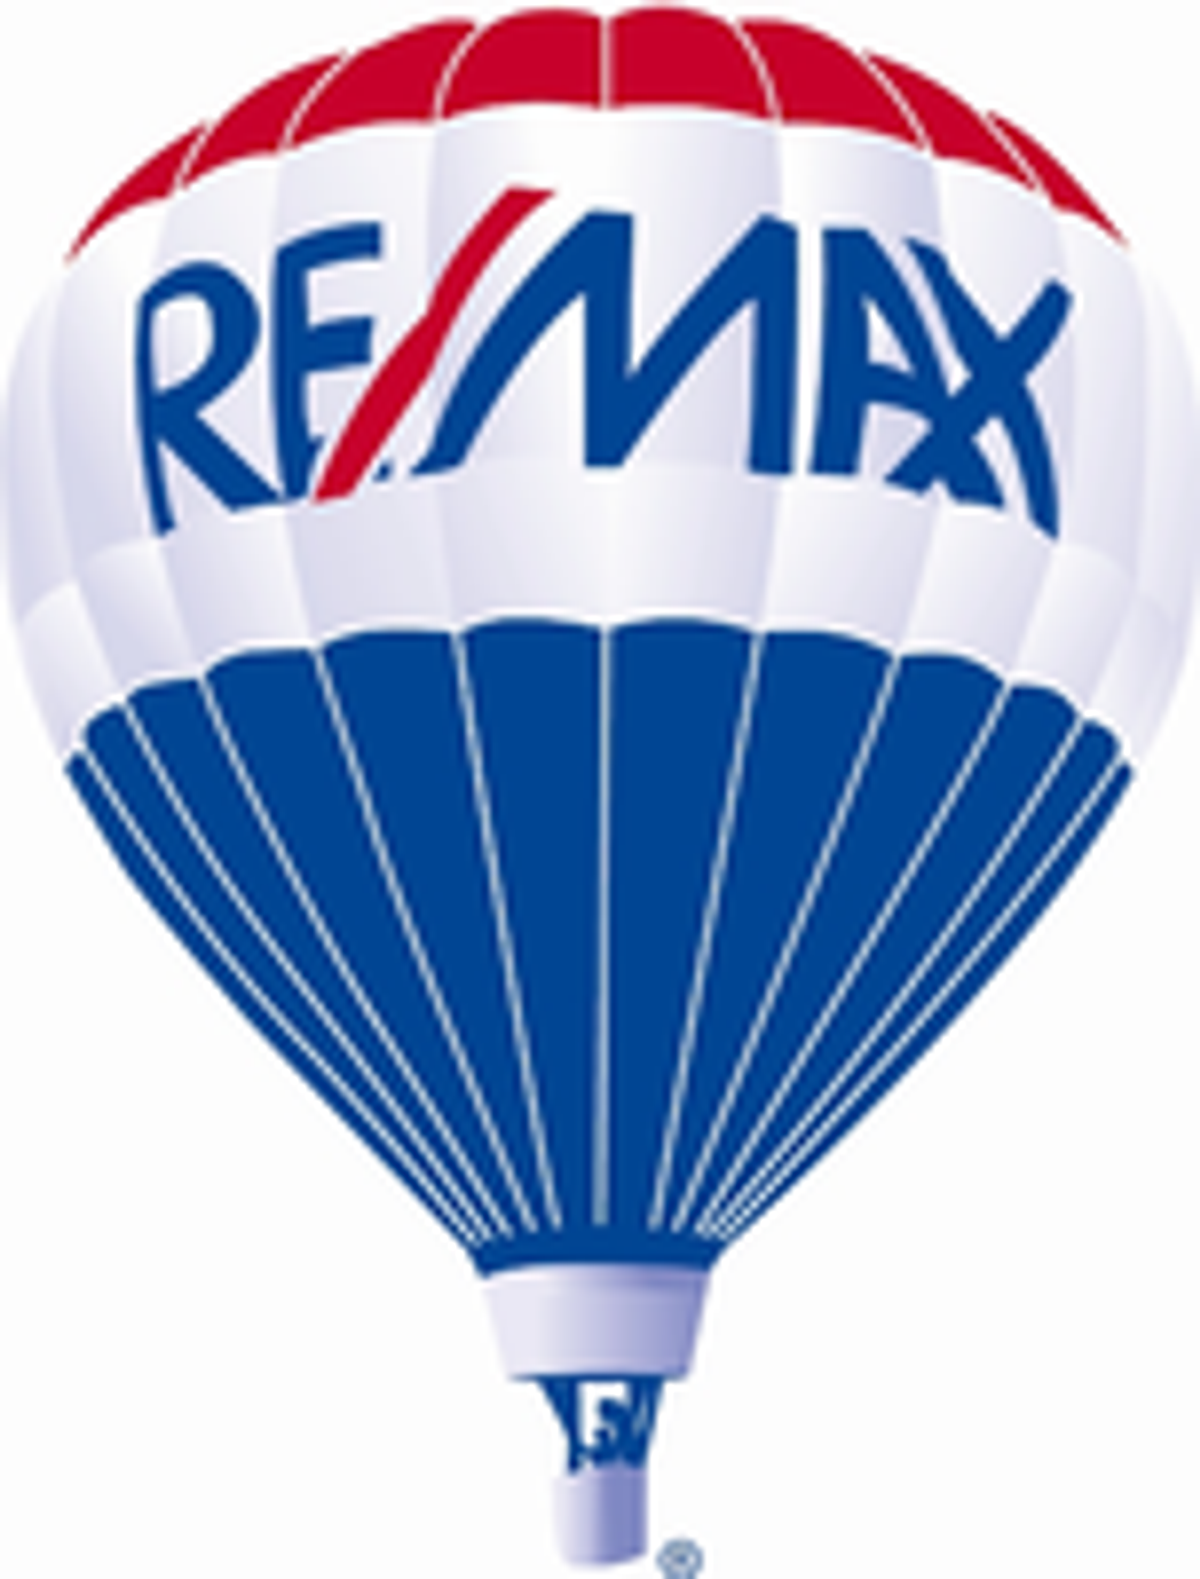 Photo for DELENE MYERS, Listing Agent at RE/MAX INTEGRITY ALBANY